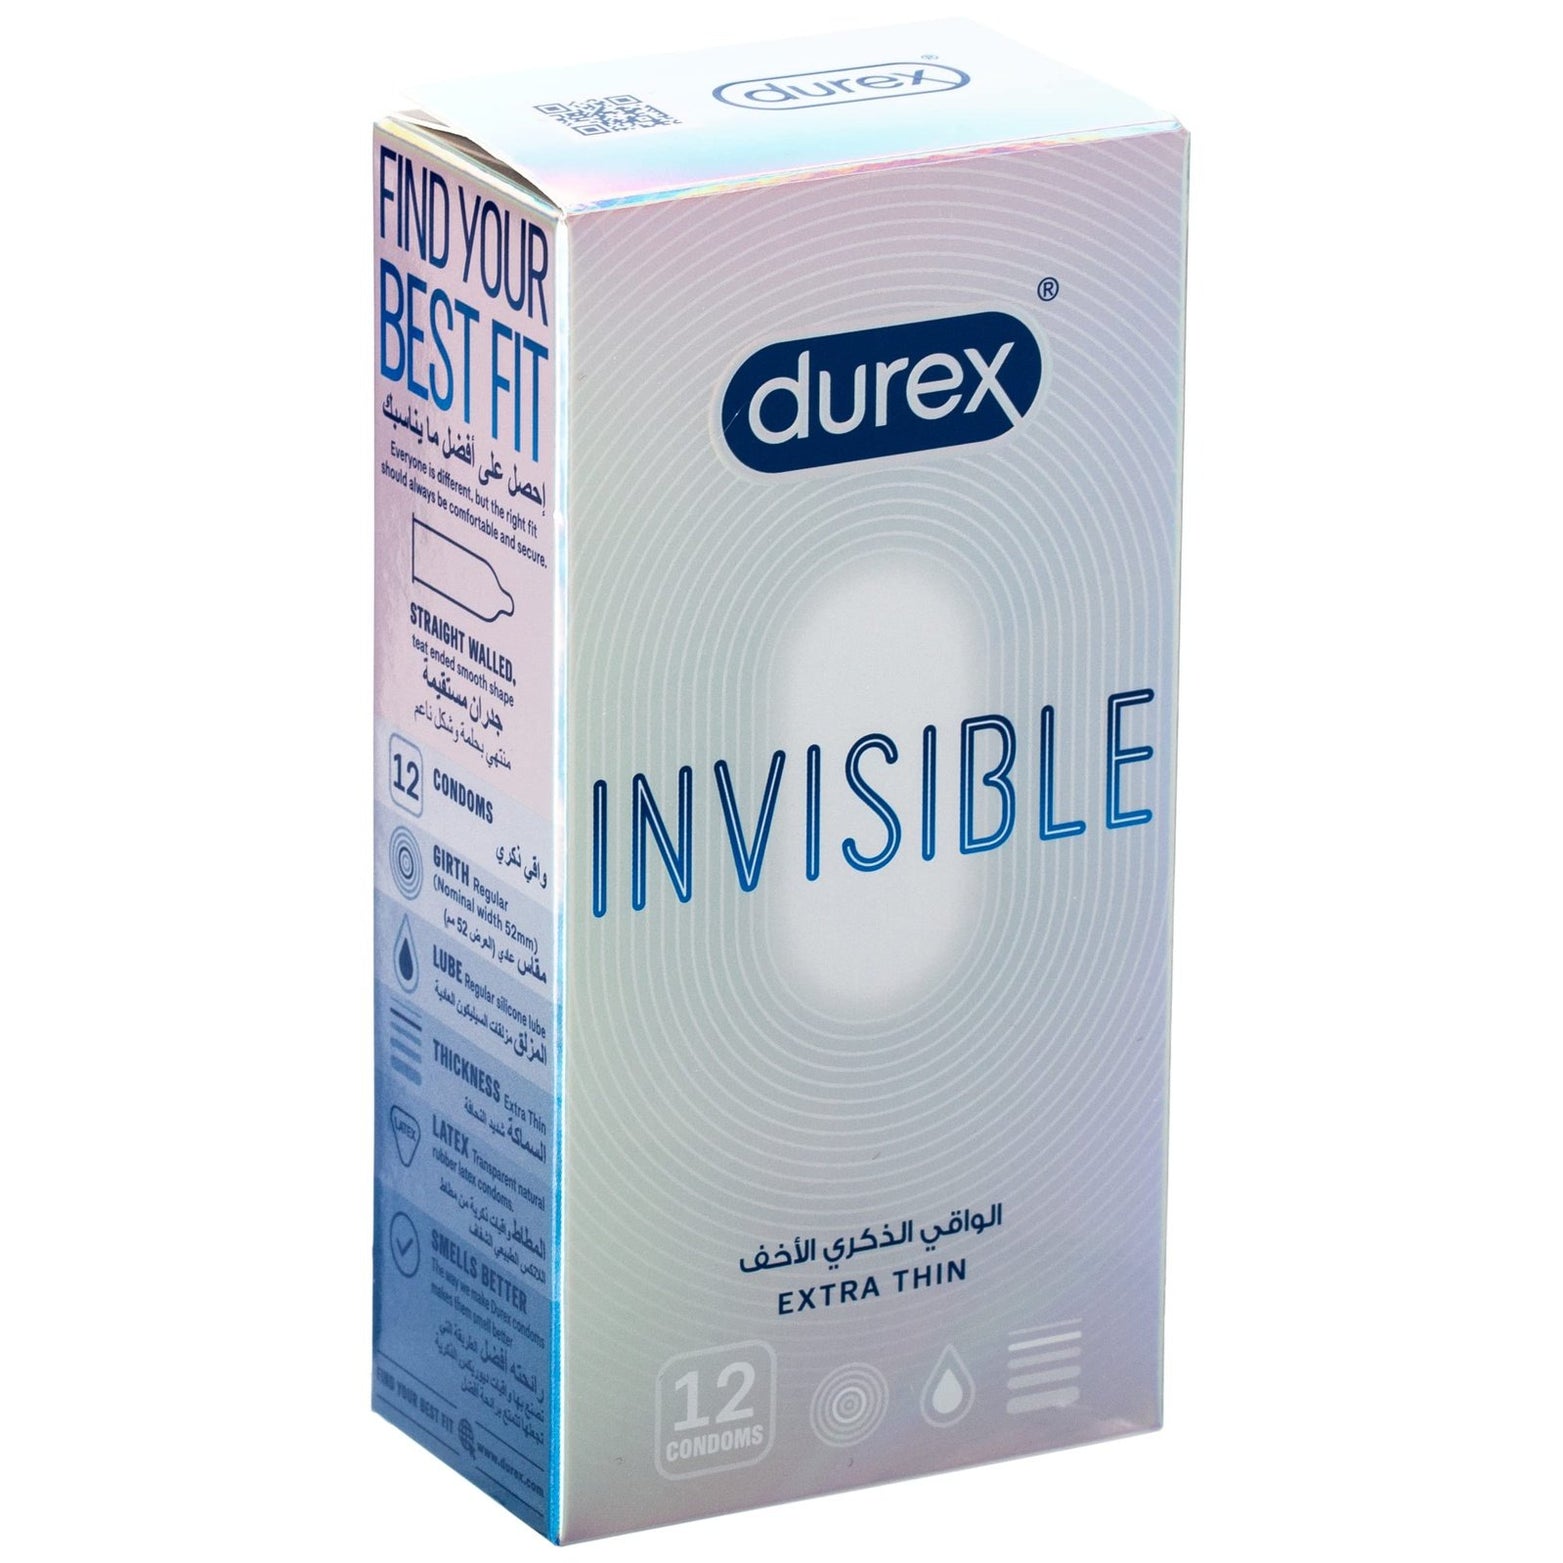 Durex Invisible Extra Thin Condom - Pack Of 12 - Med7 Online